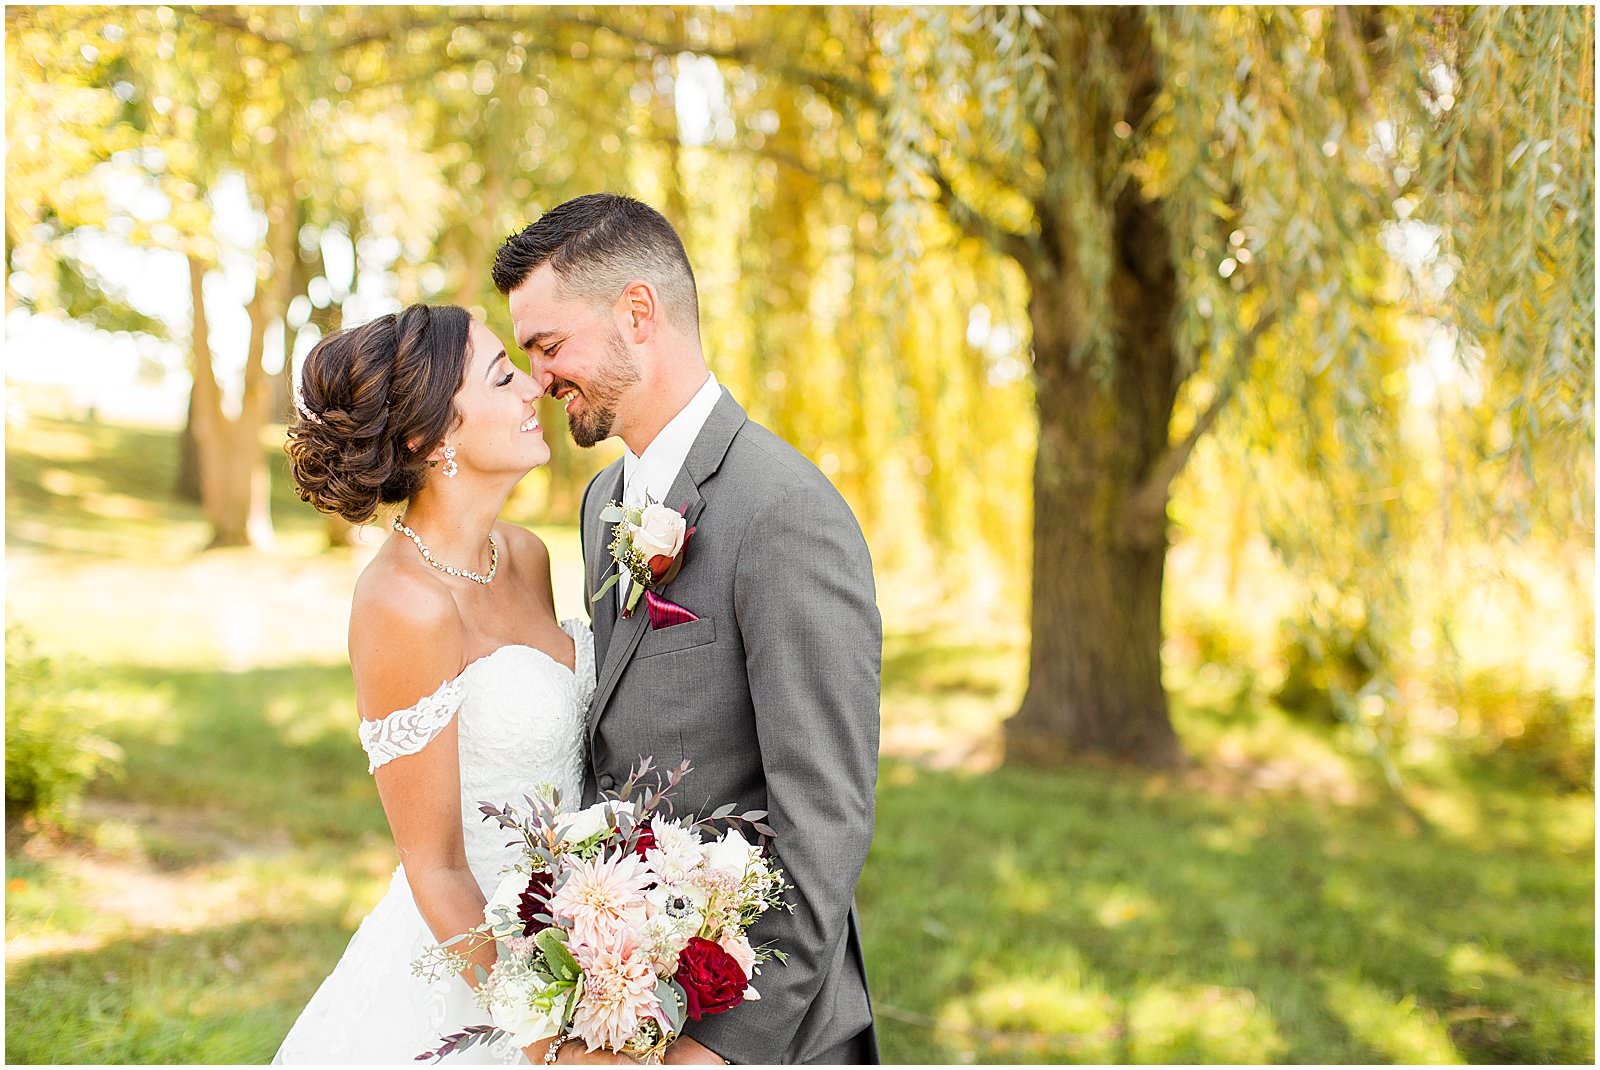 A Stunning Fall Wedding in Indianapolis, IN |. Sally and Andrew | Bret and Brandie Photography 0059.jpg